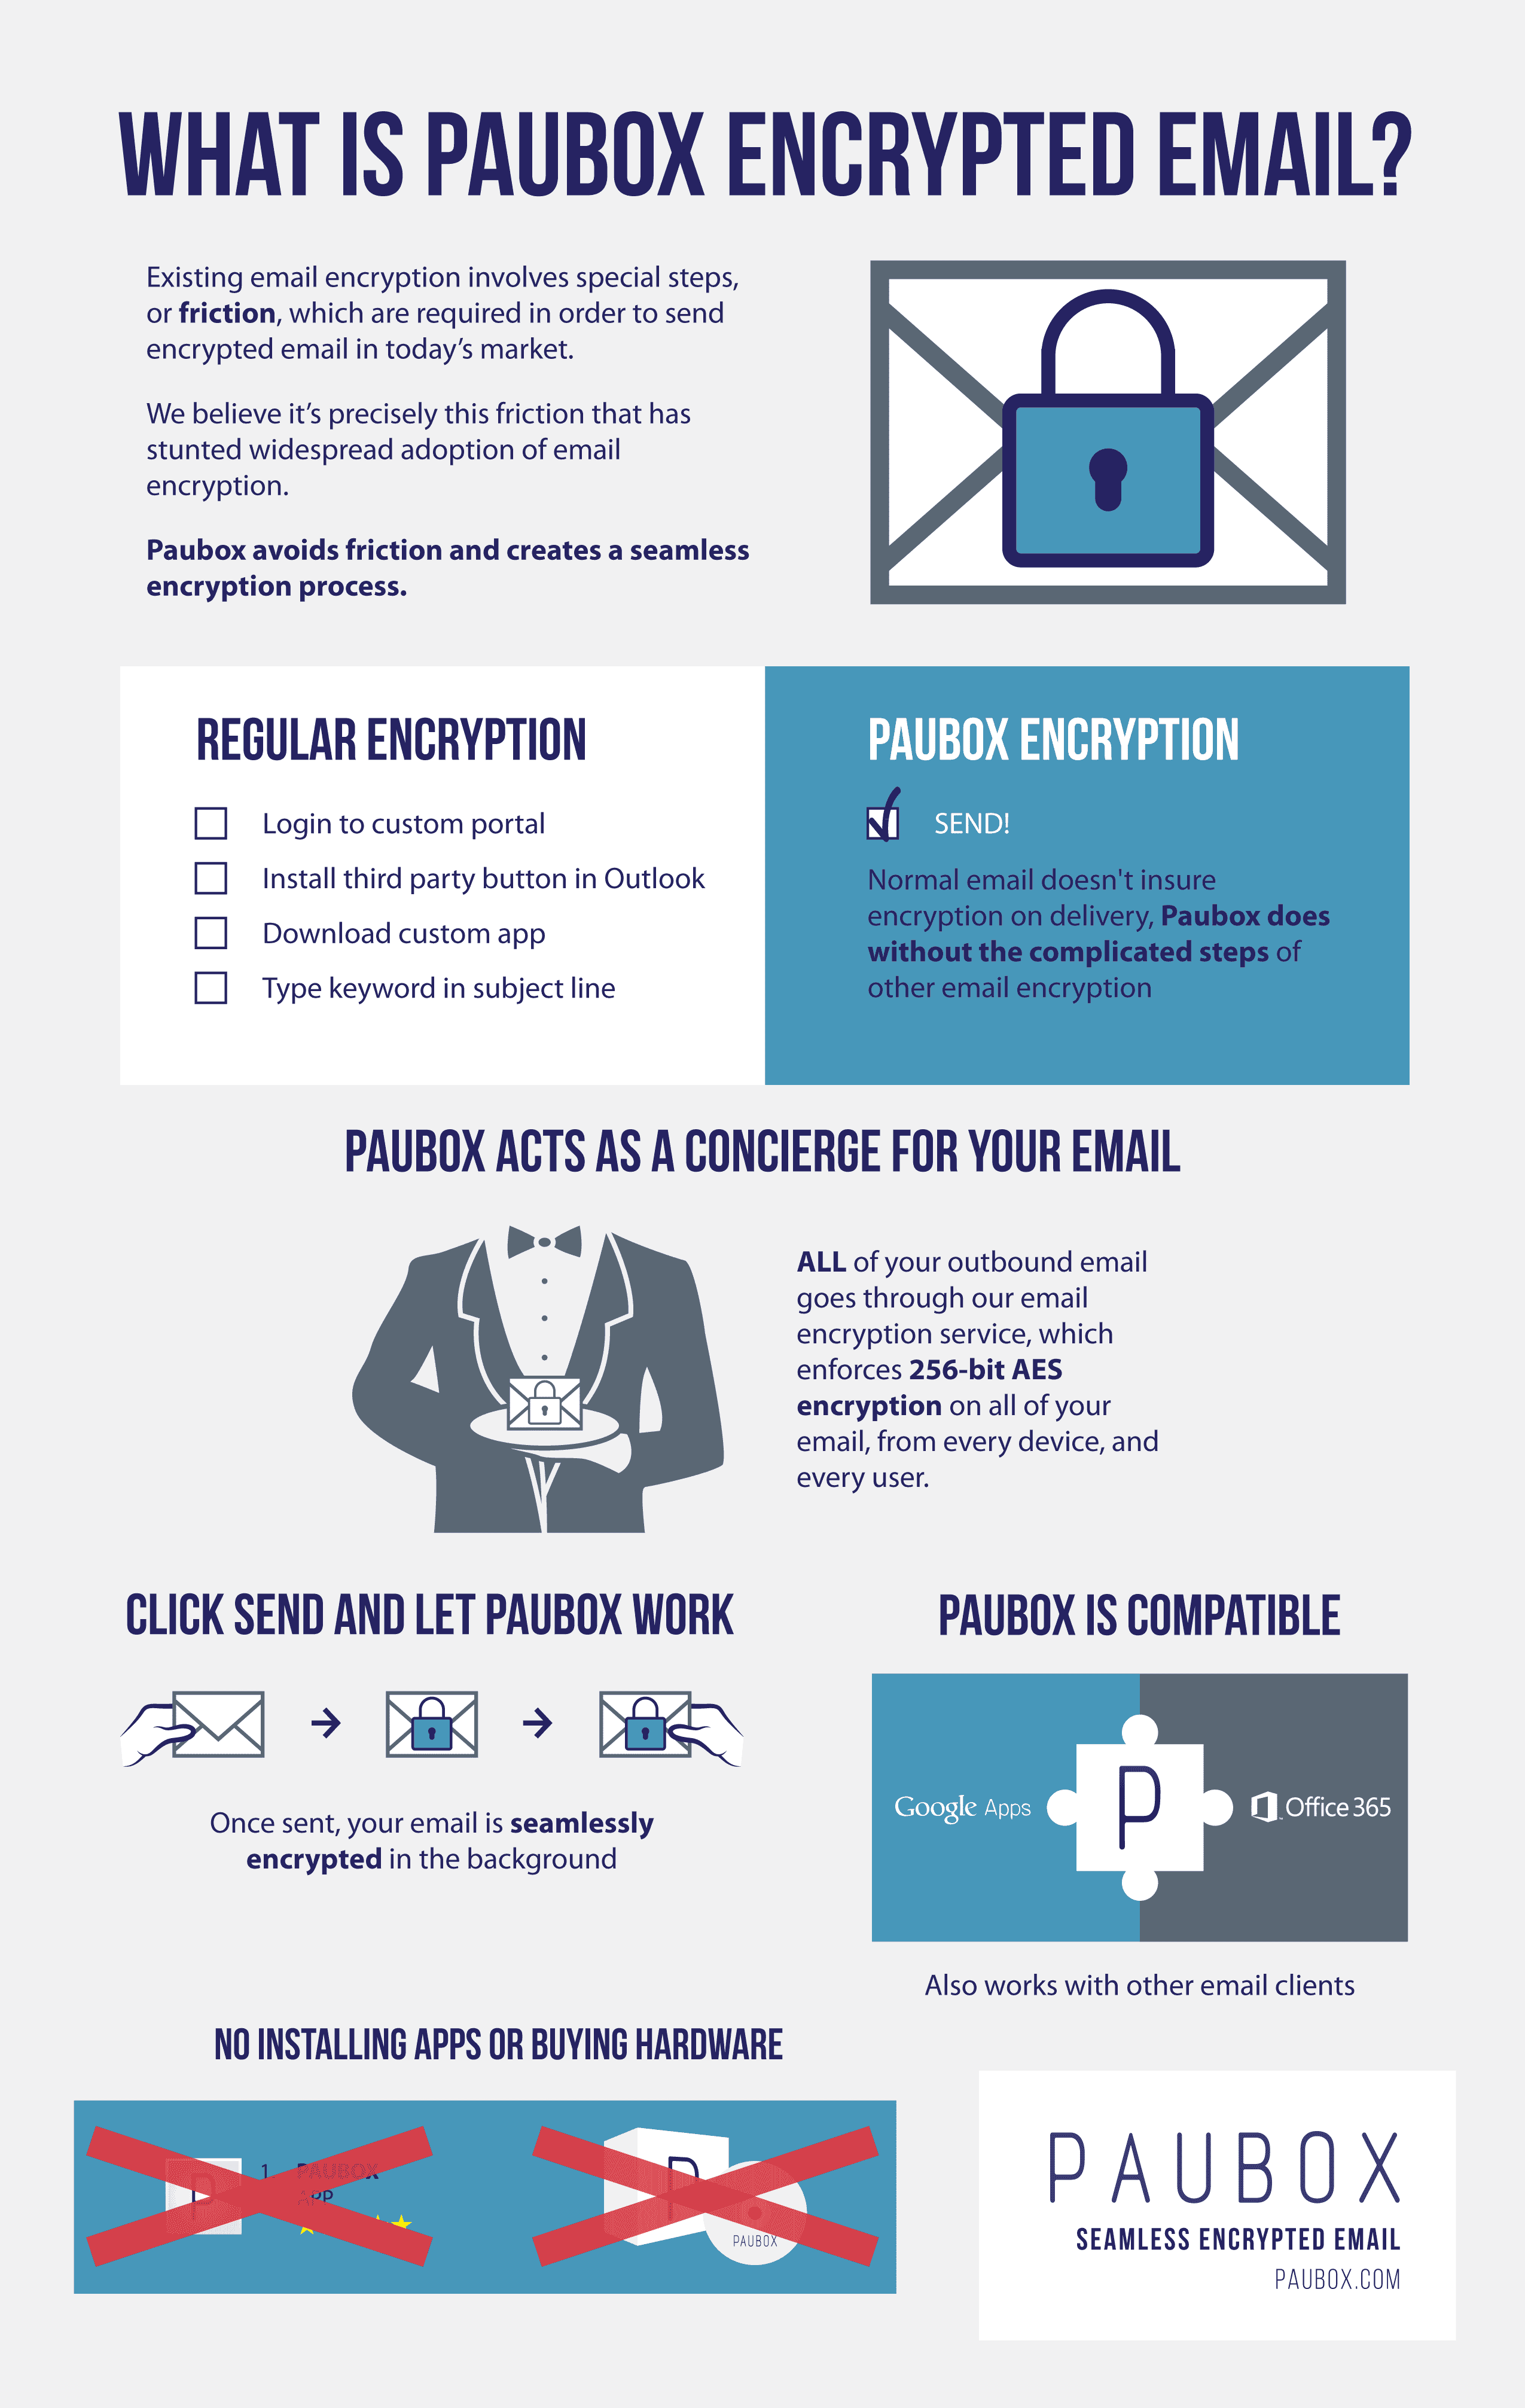 What does HIPAA compliant email look like?